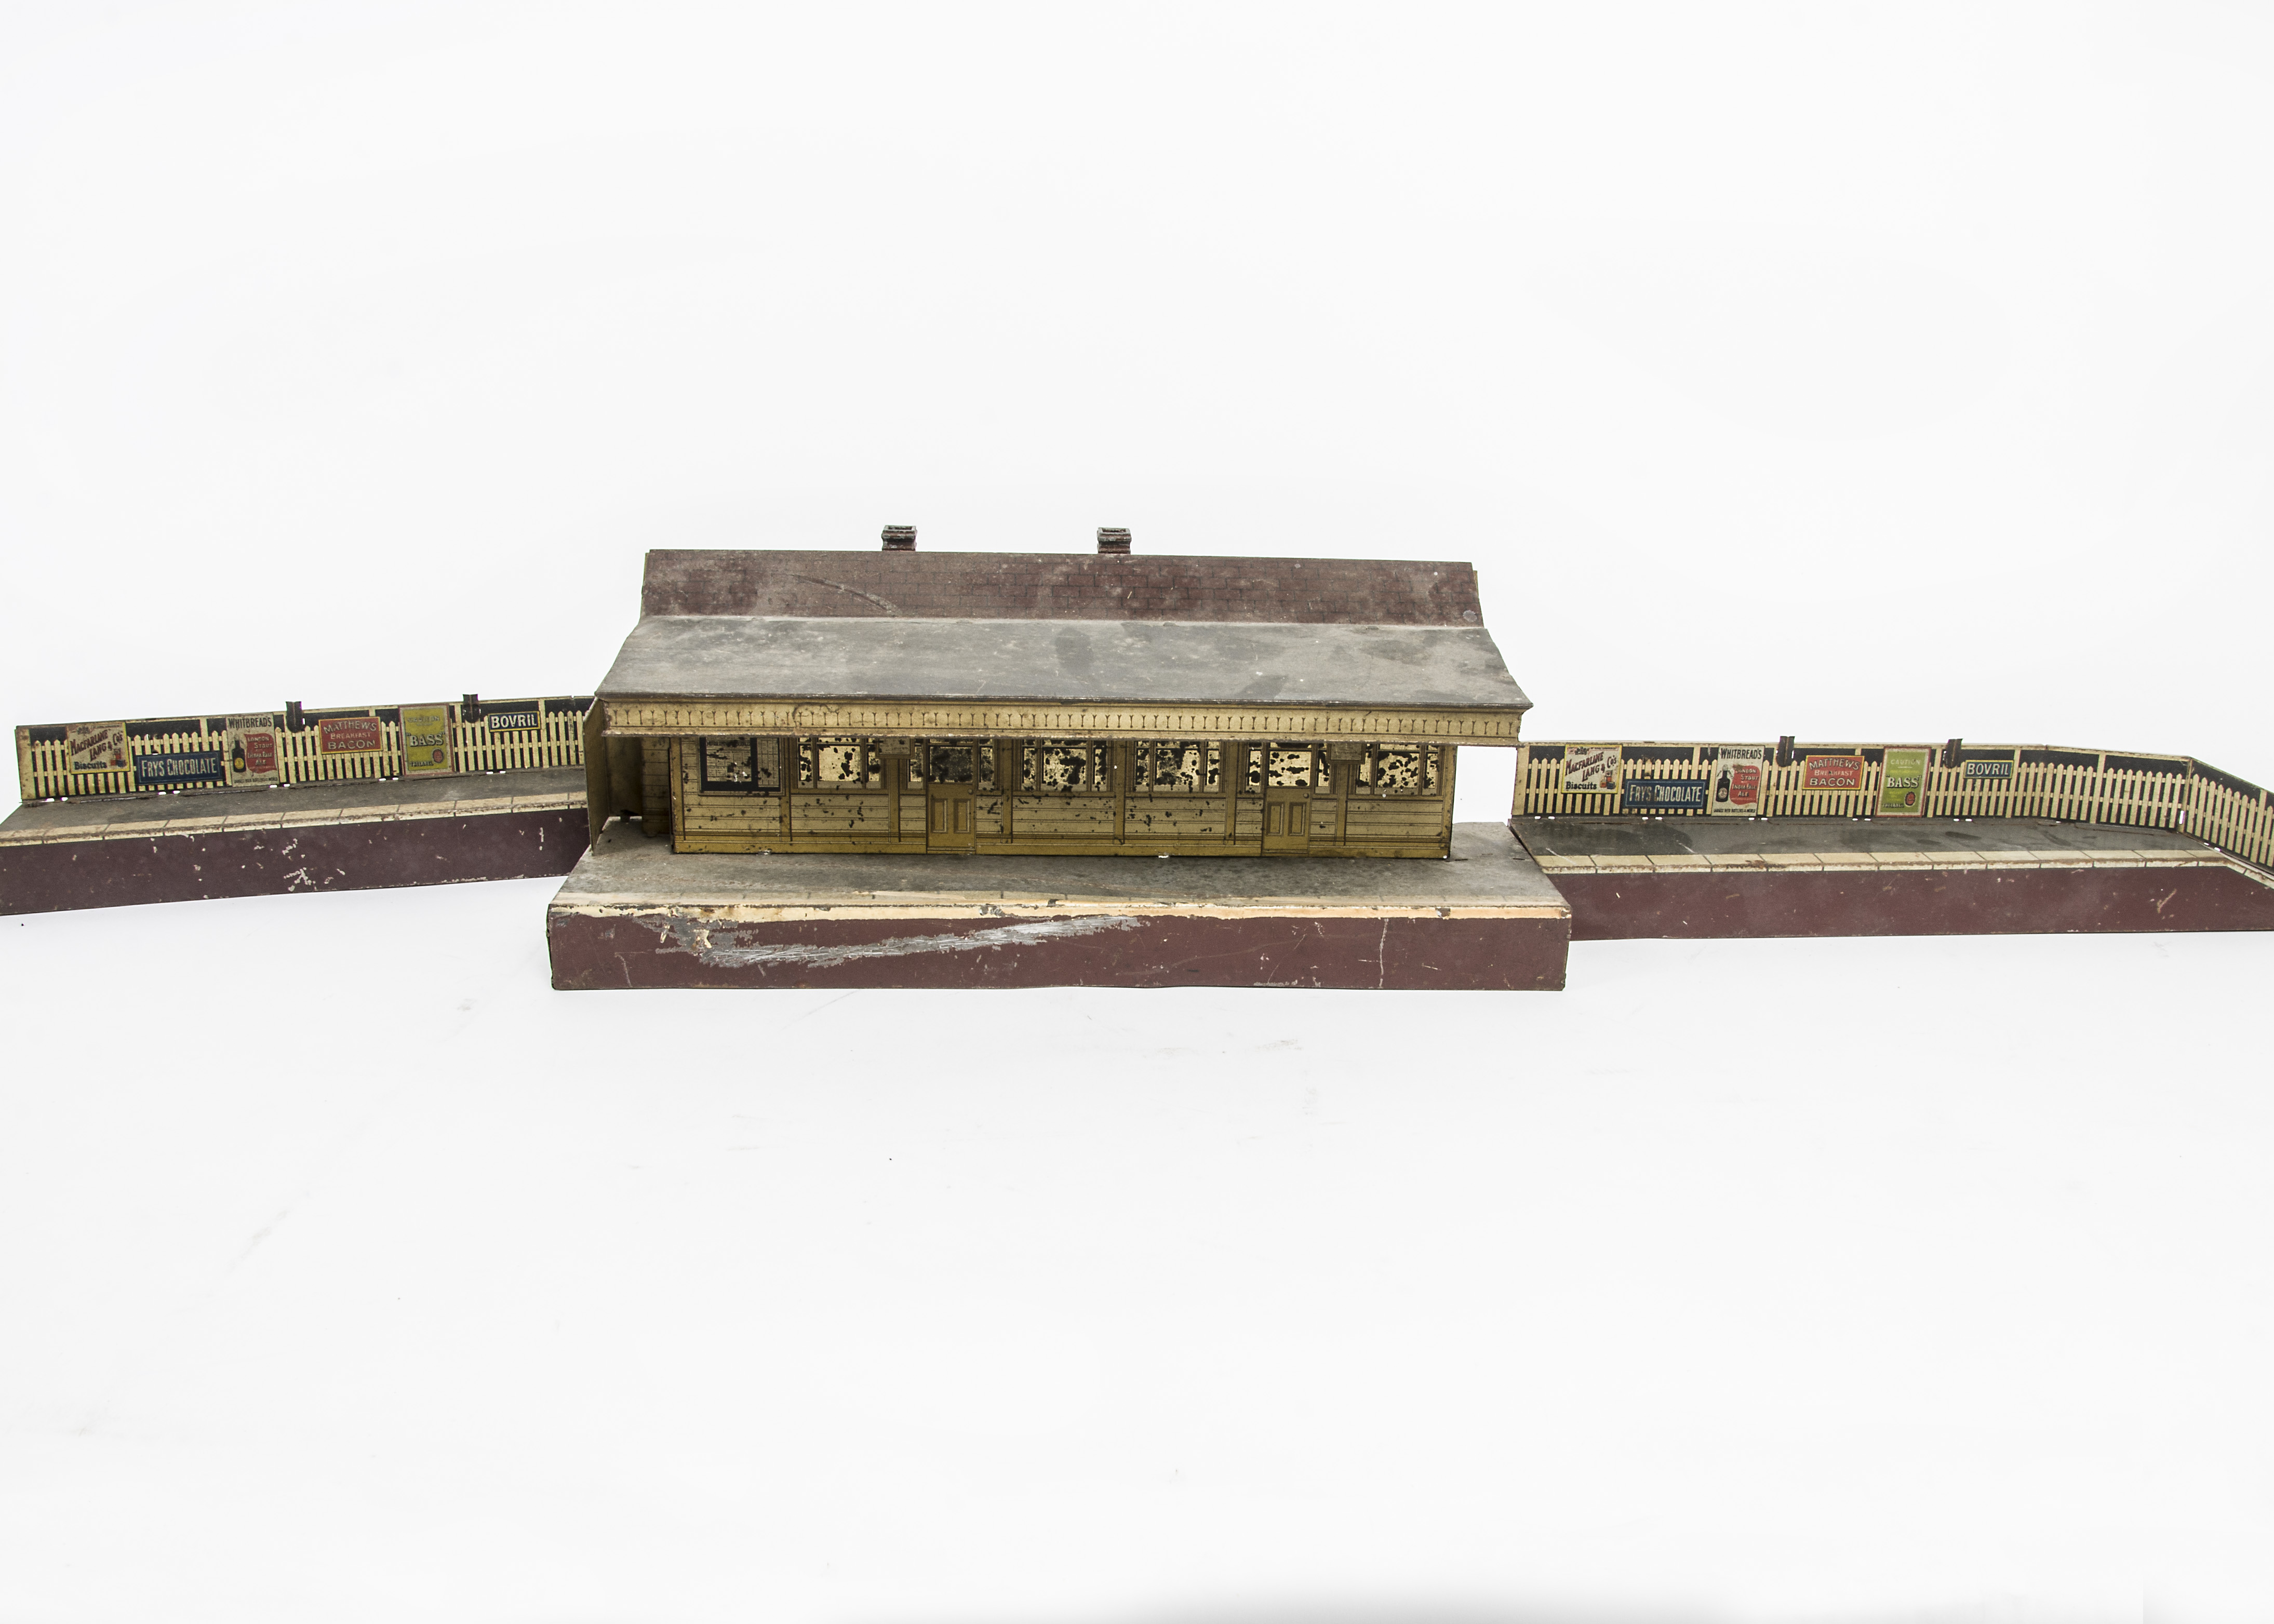 A Bassett-Lowke (Carette-style) Gauge 1 'Four Oaks' Station, with central building section and two